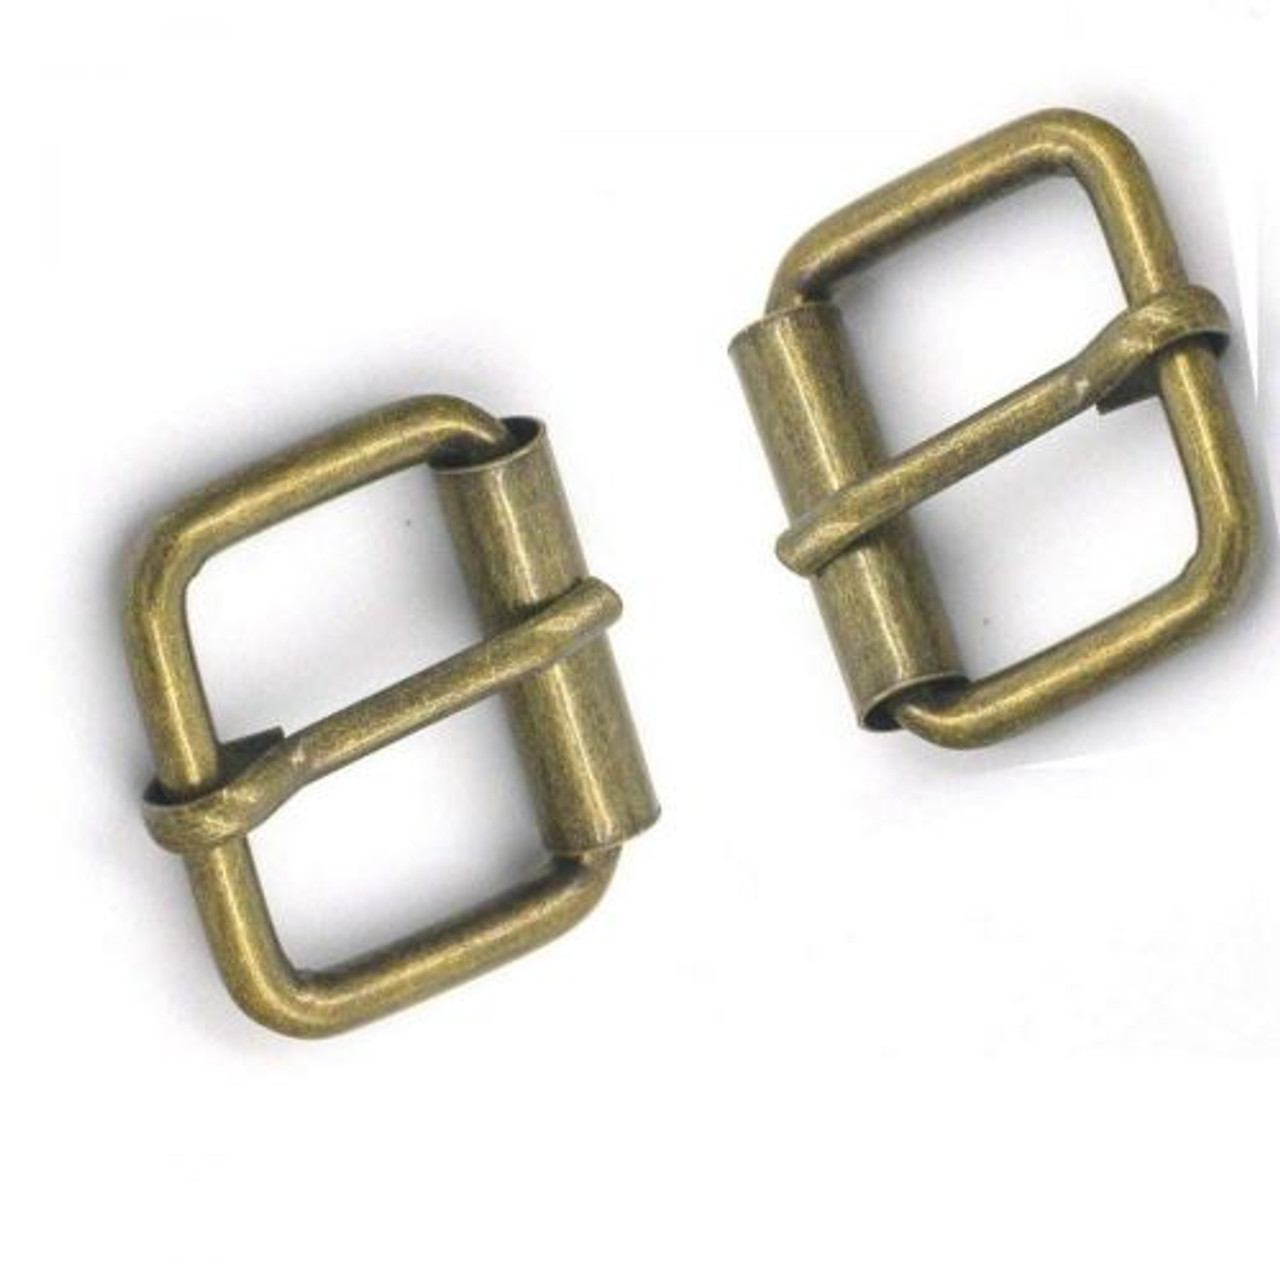 15mm One-Pin Roller Buckle - 2pcs